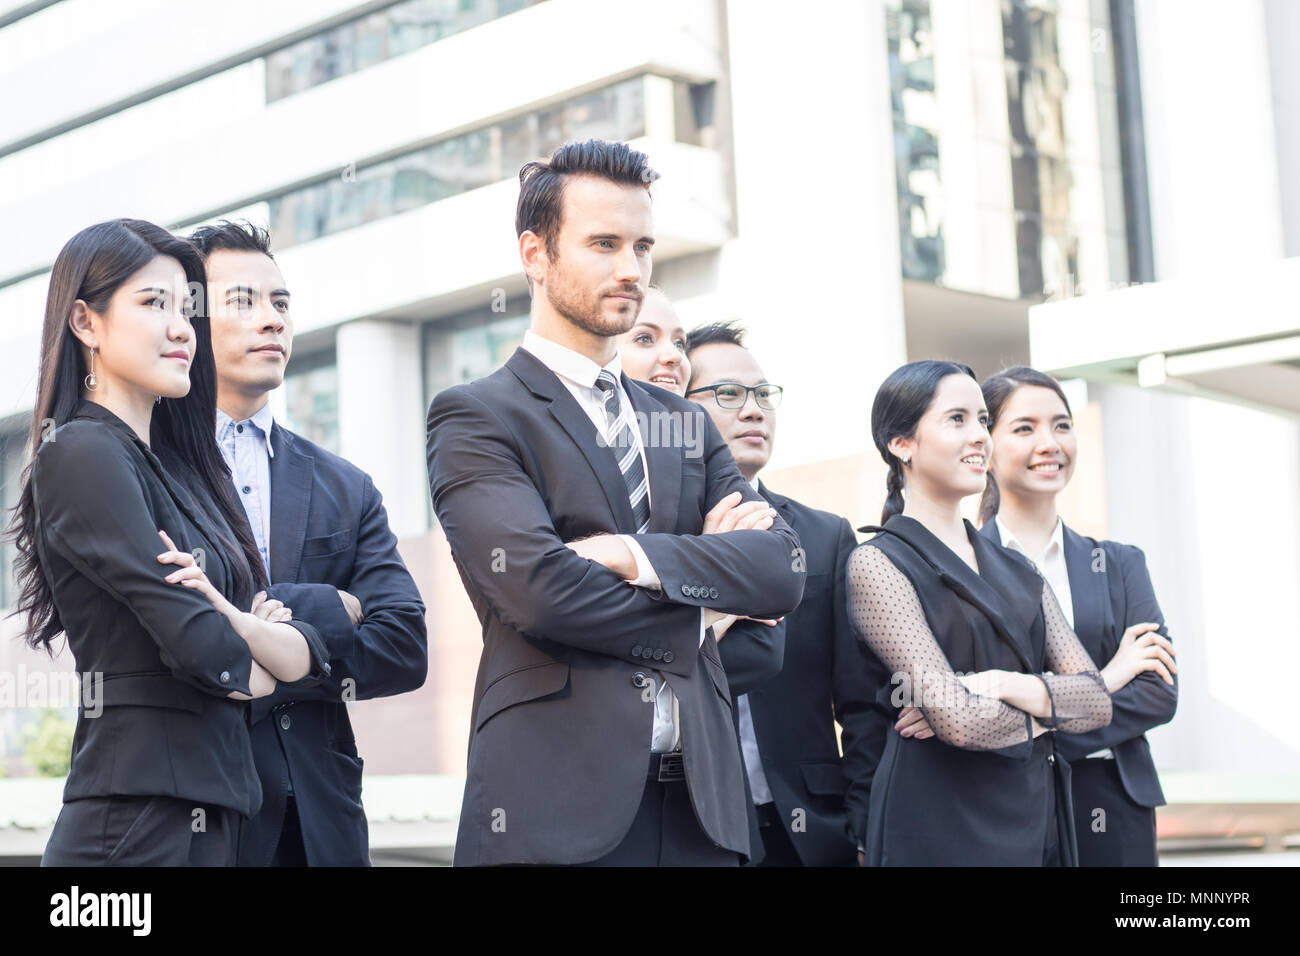 Teamwork and professional partnership concept, businesspeople team of multi ethnic standing  with confidence in full suit Stock Photo